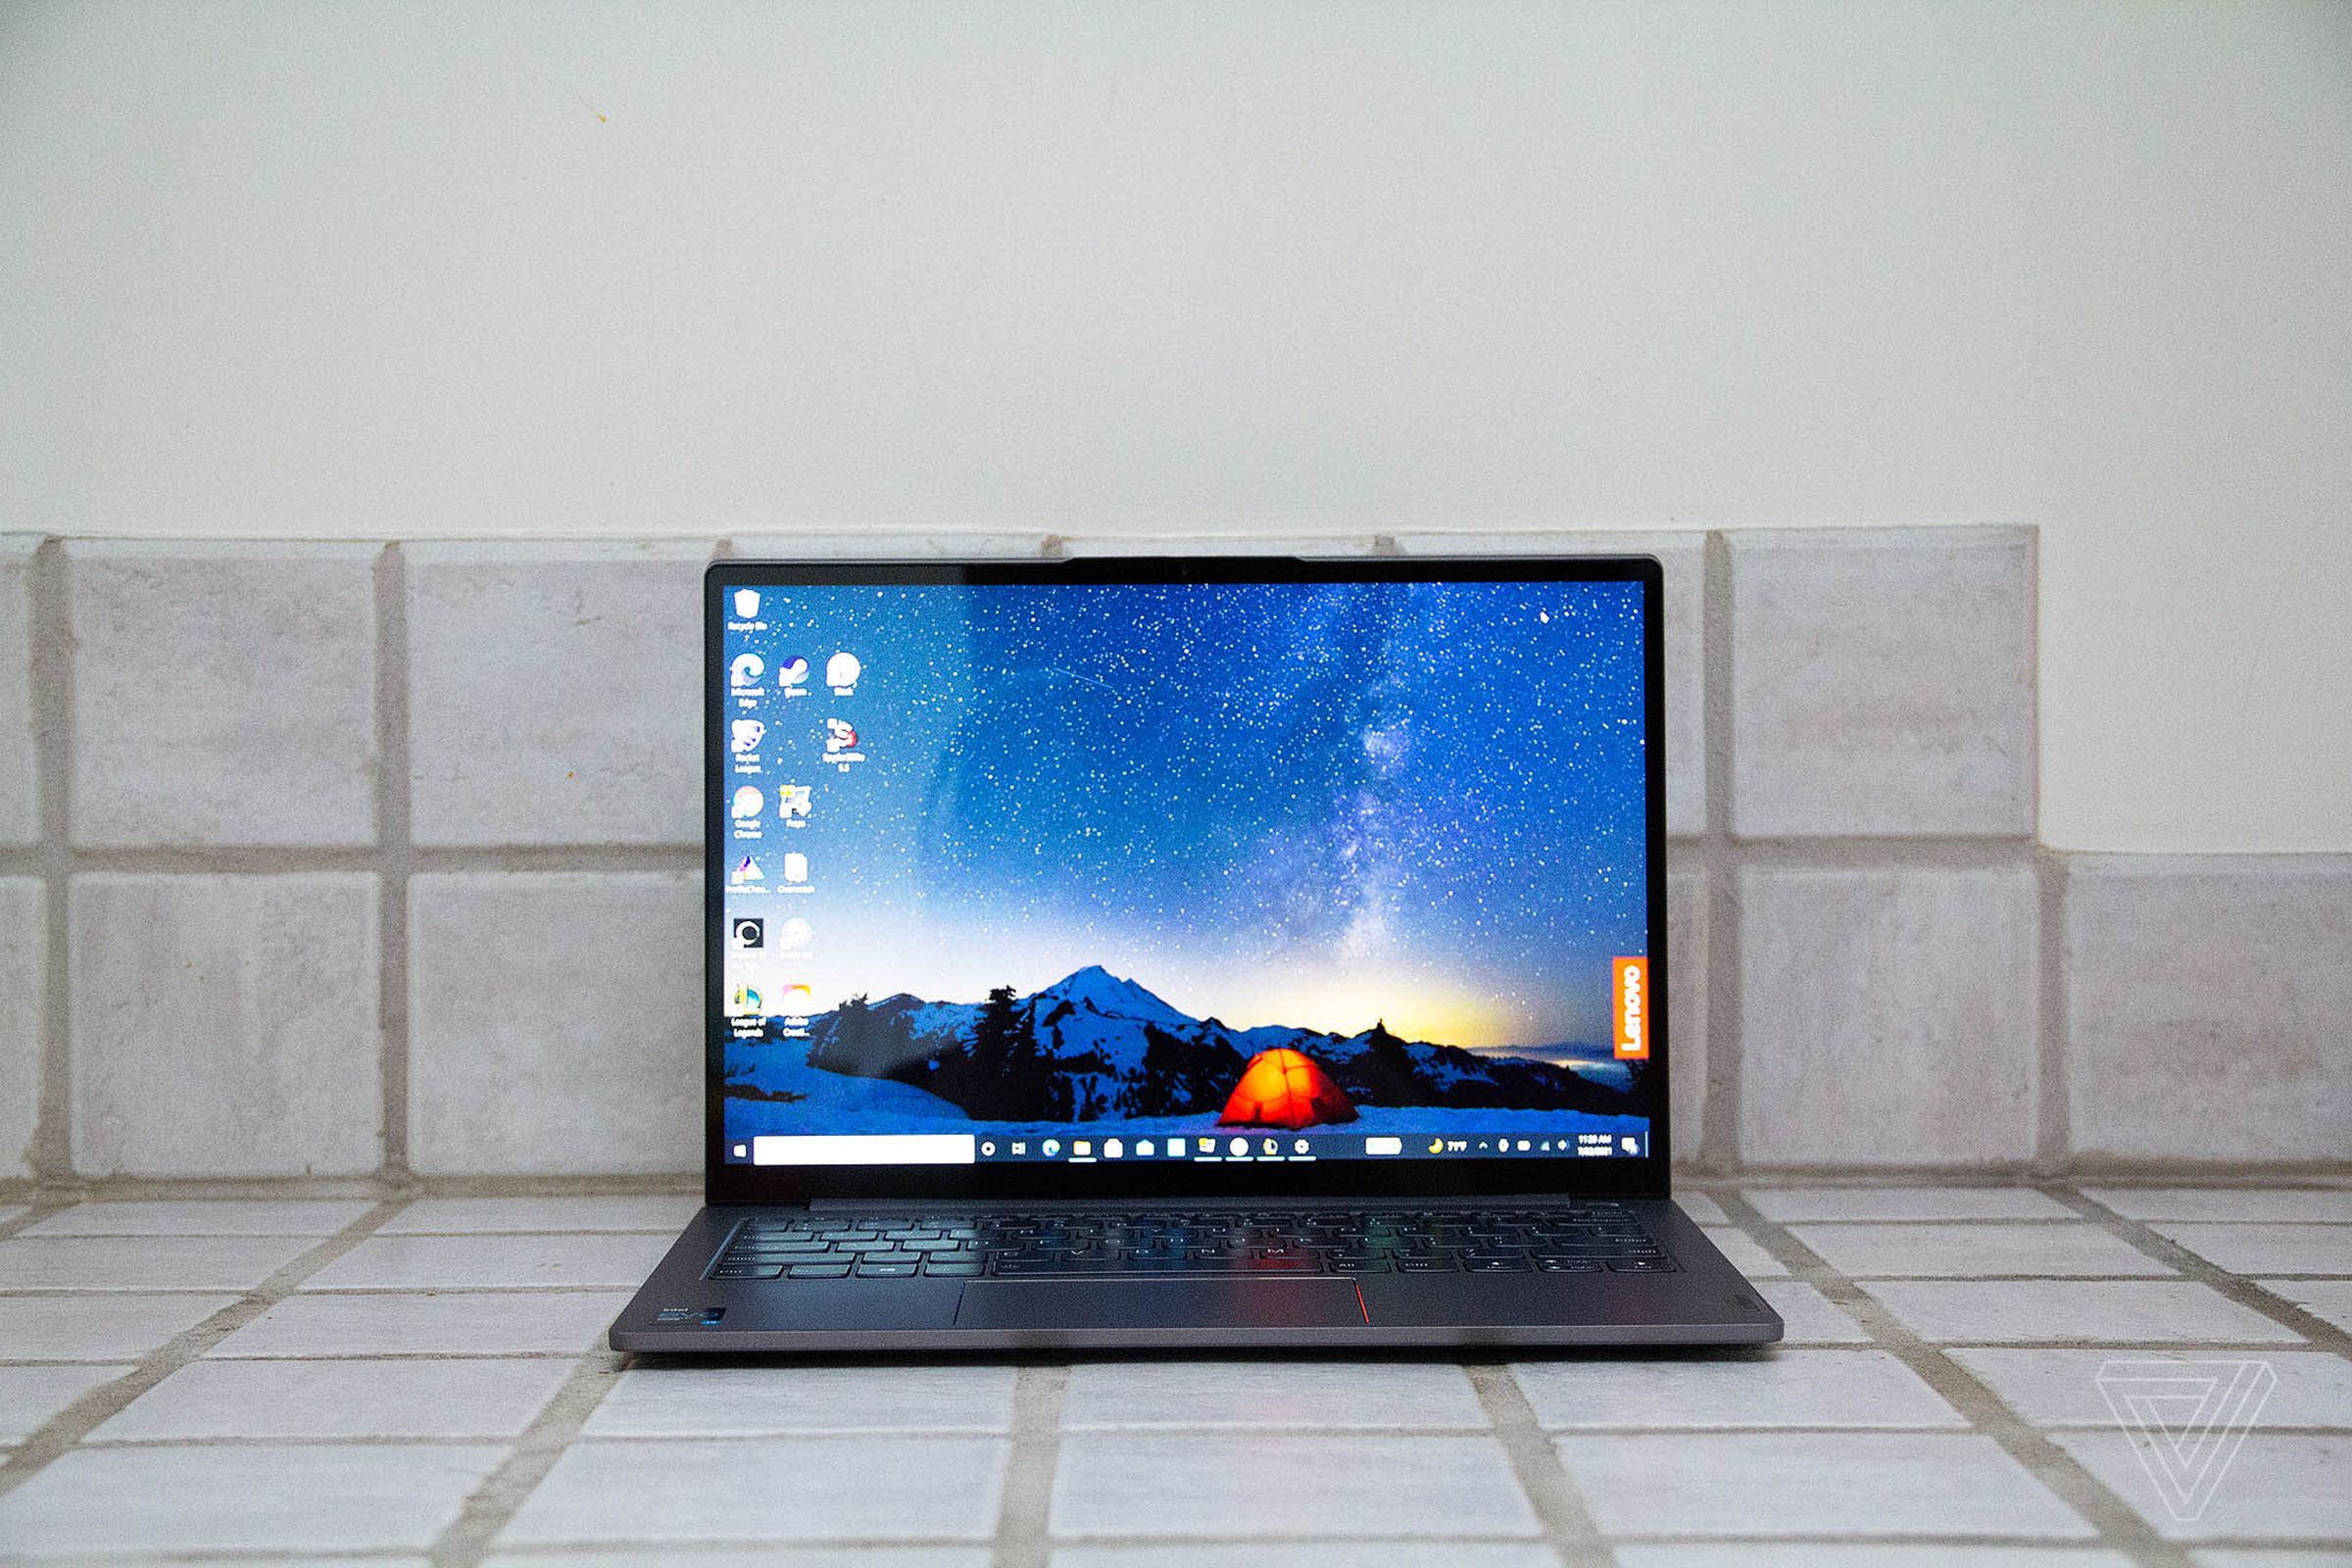 The Lenovo ThinkBook 13s seen from the front on a white-tiled countertop. The screen displays a night mountain scene with a bright tent in the center and a Lenovo banner on the right side.